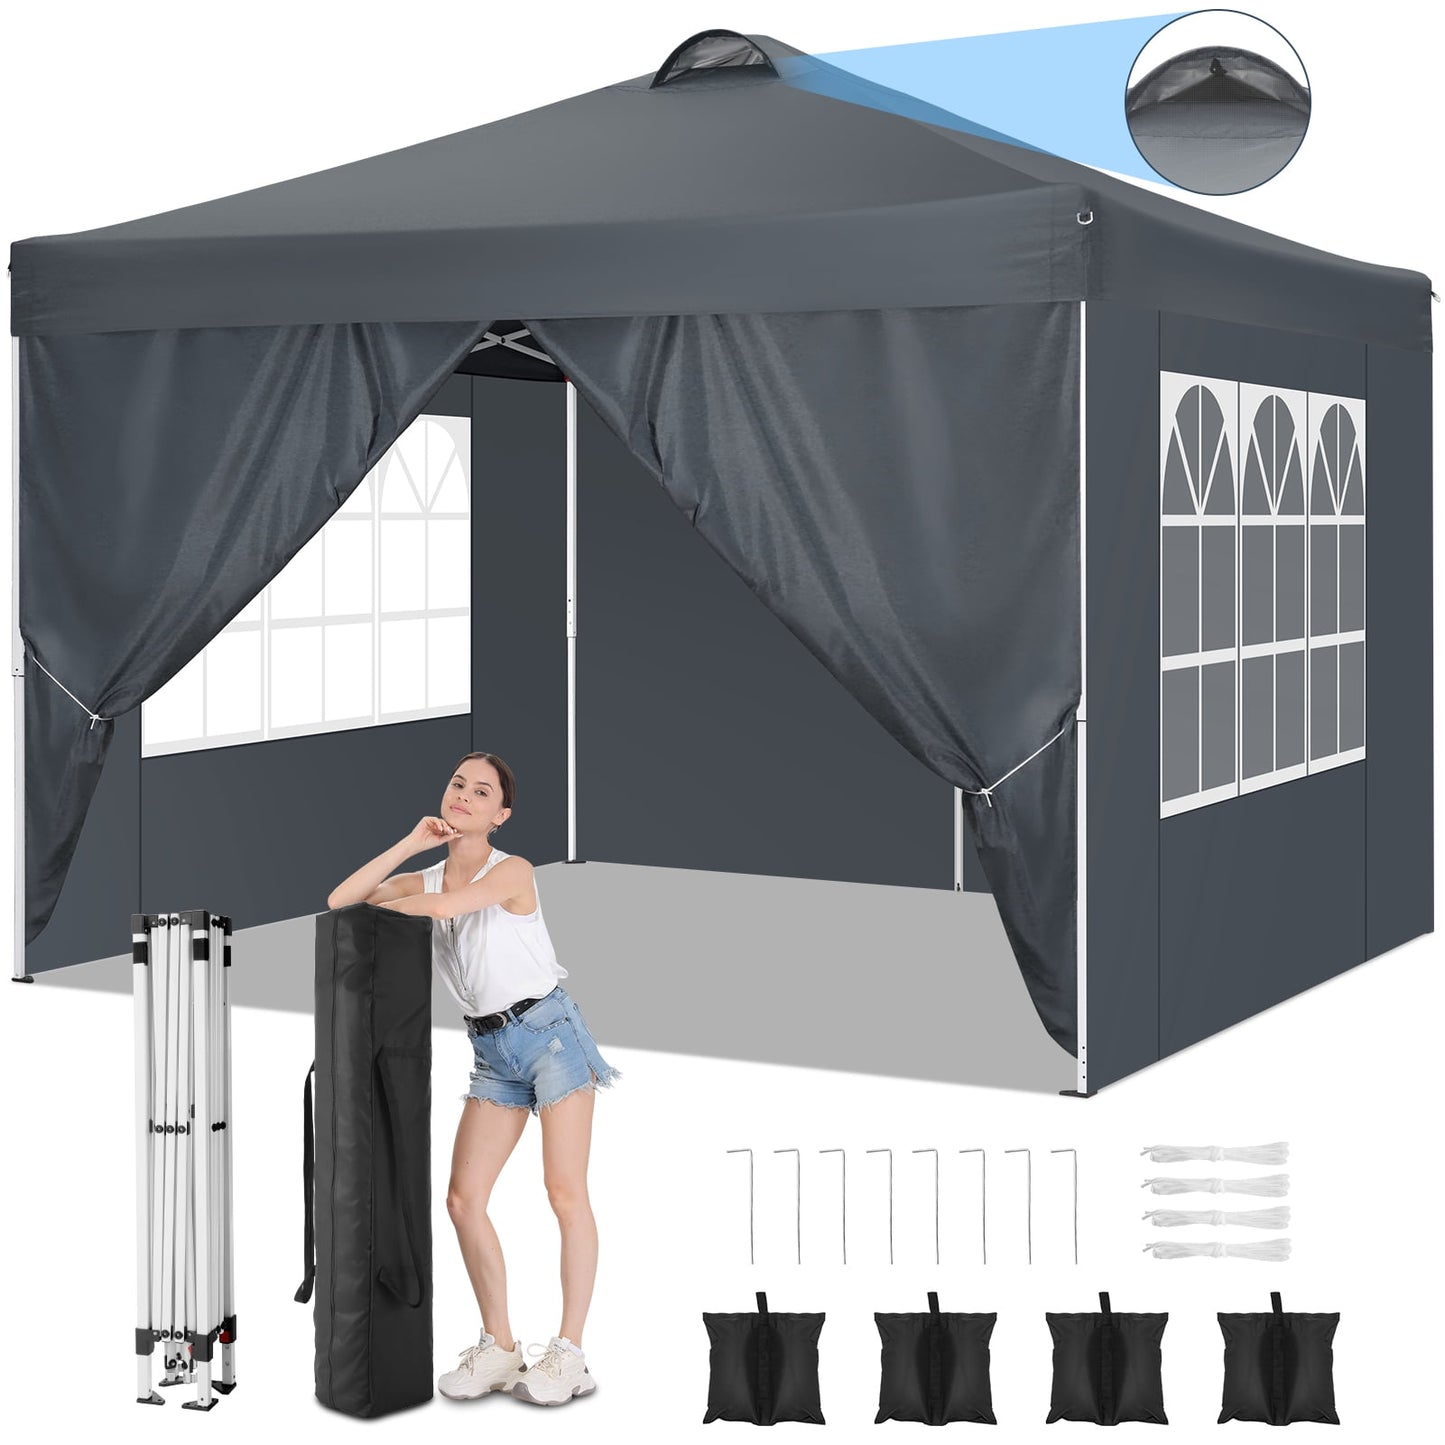 10'x10' Pop up Canopy for Party, Outdoor Camping Instant Waterproof Gazebo, Sun Protected Adjustable Commercial Tent, with Vent on Top, 4 Removable Side Walls, 9 Sandbags, Carry Bag (Black）